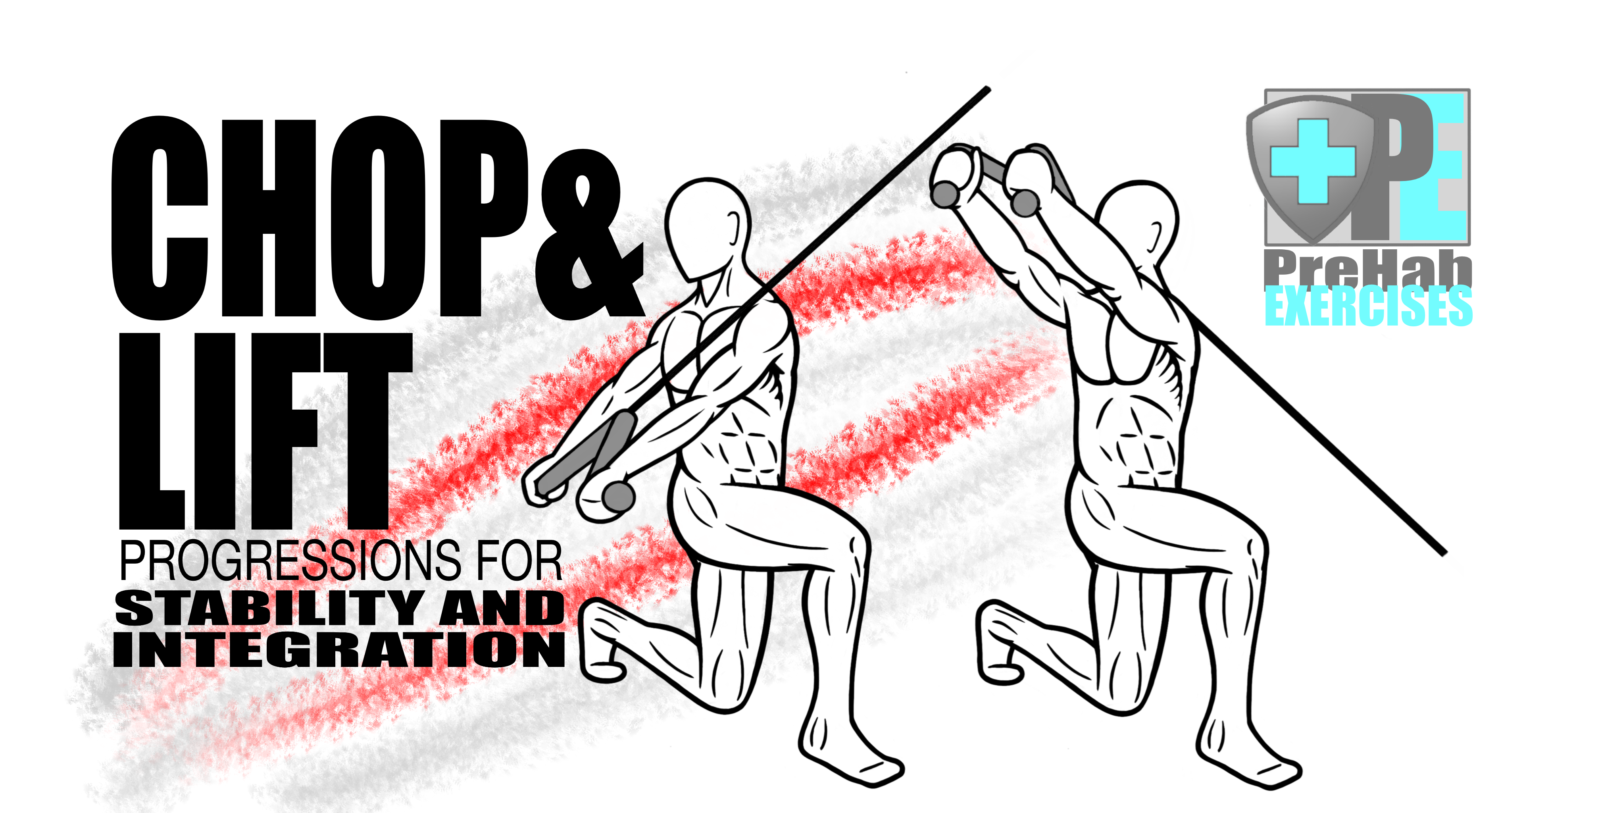 Chop and Lift Progressions for Stability and Integration